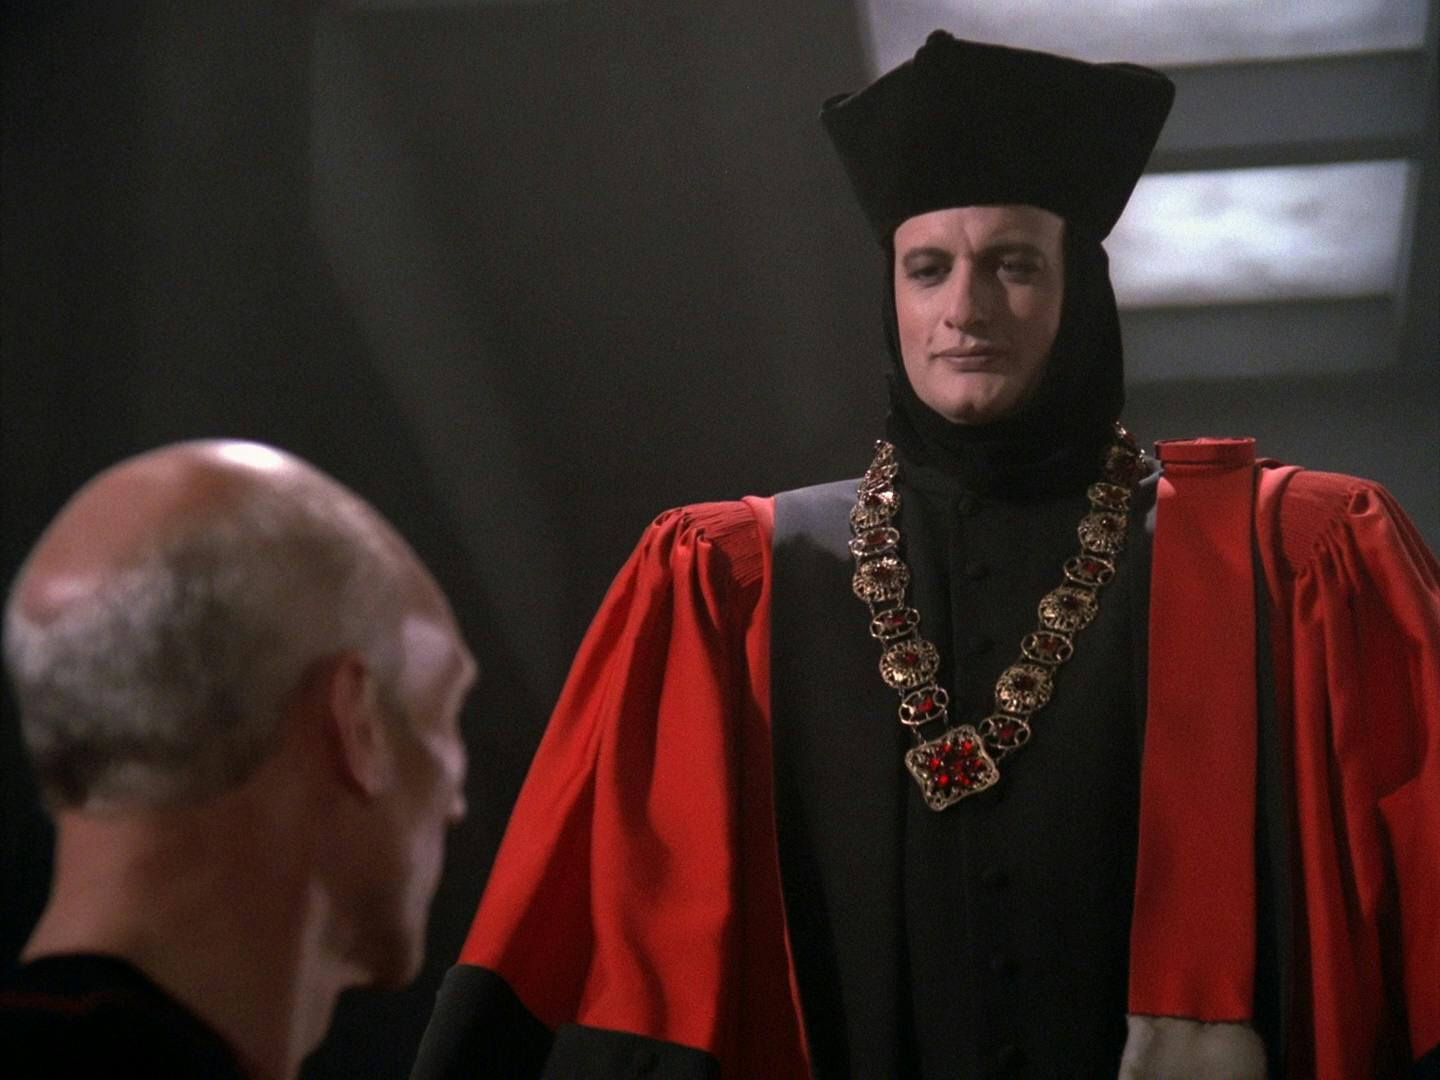 At humanity's trial, Q stands above Picard in his judge's outfit looking down upon the humans in 'Encounter at Farpoint'